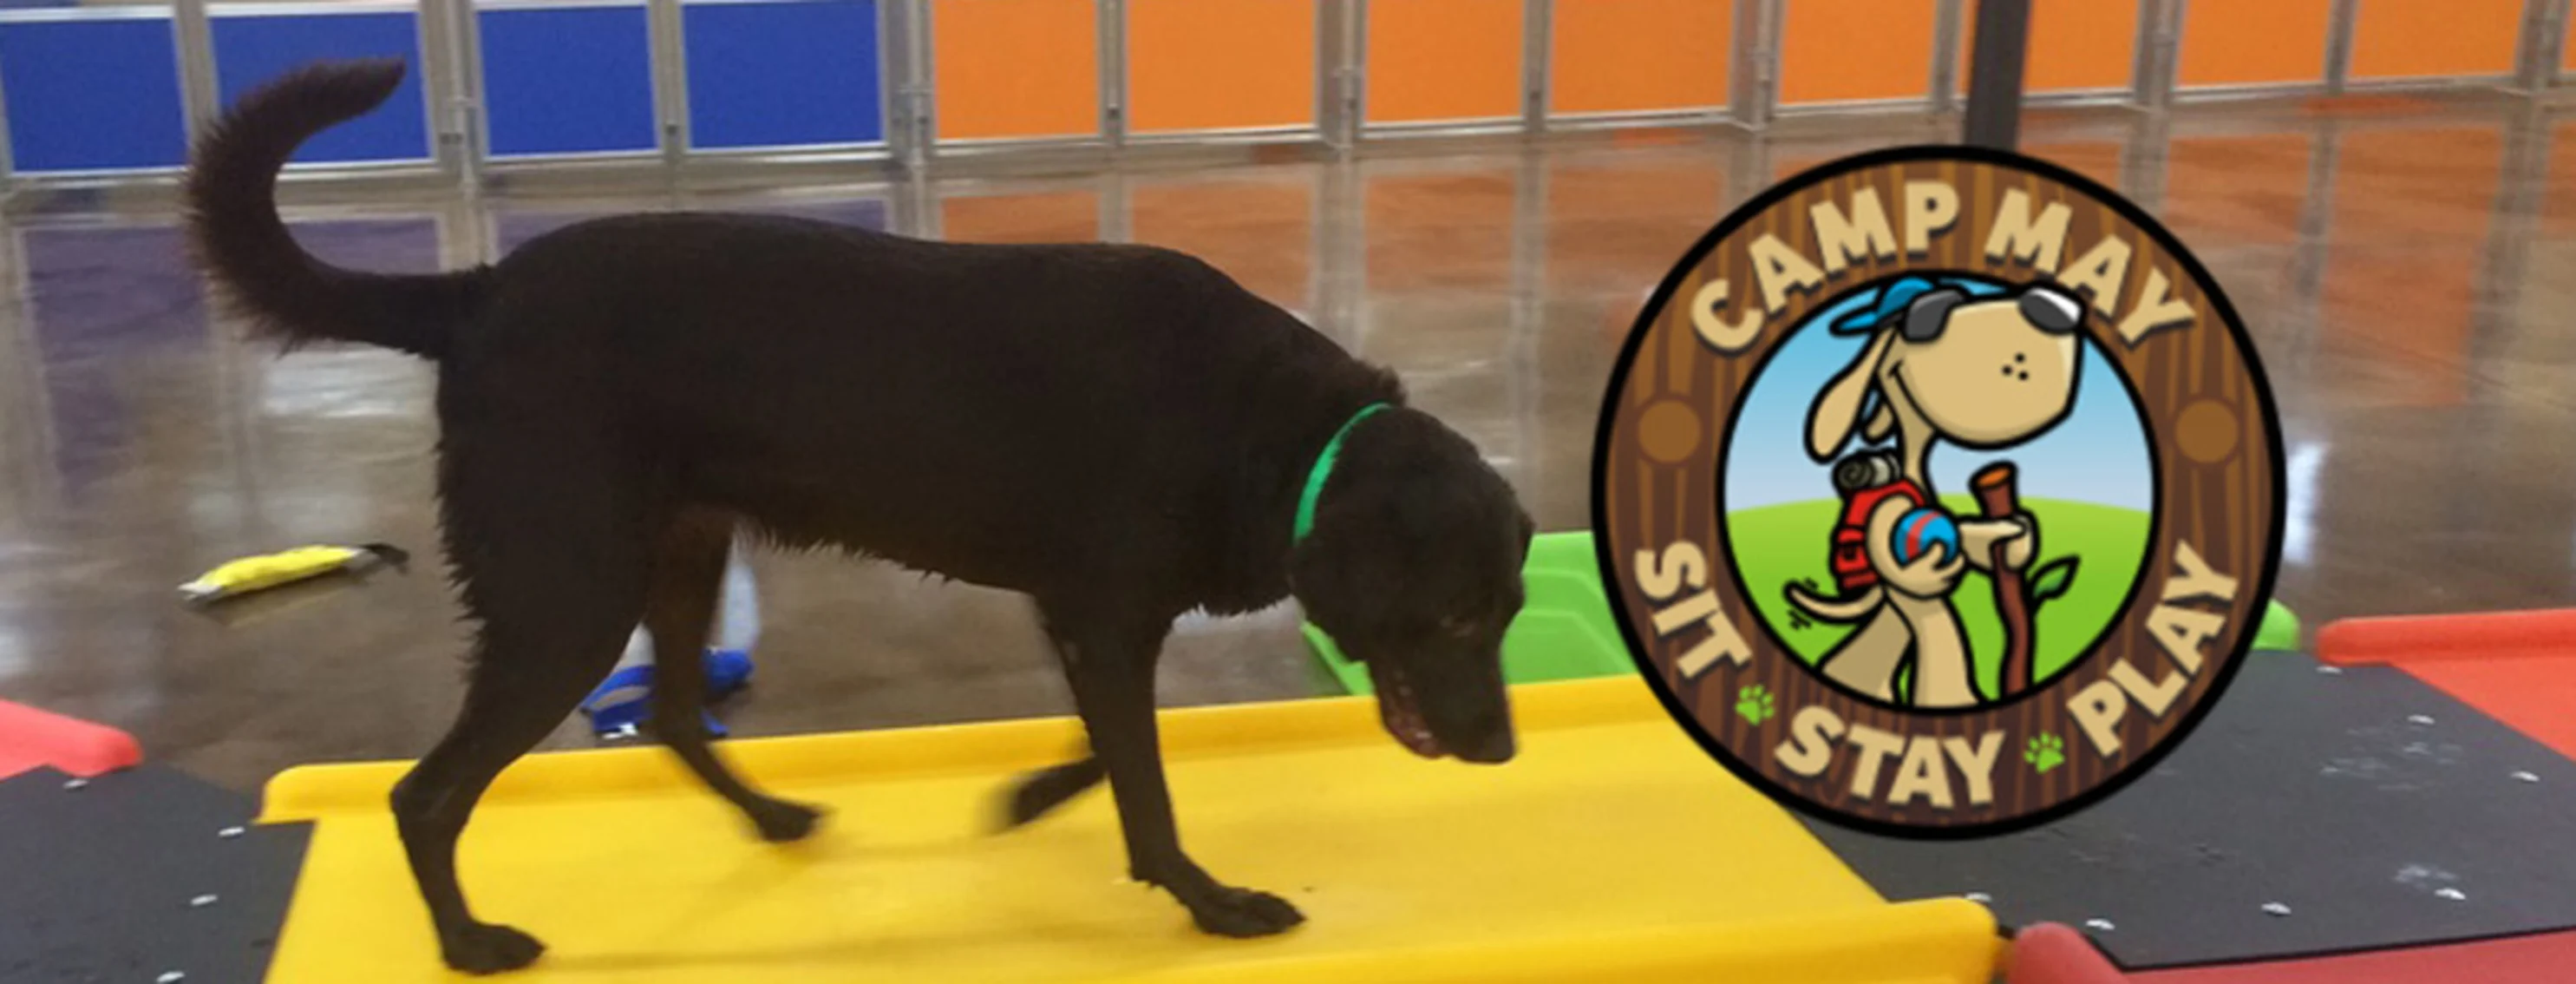 Black Labrador retriever walking on indoor play structure with camp may logo